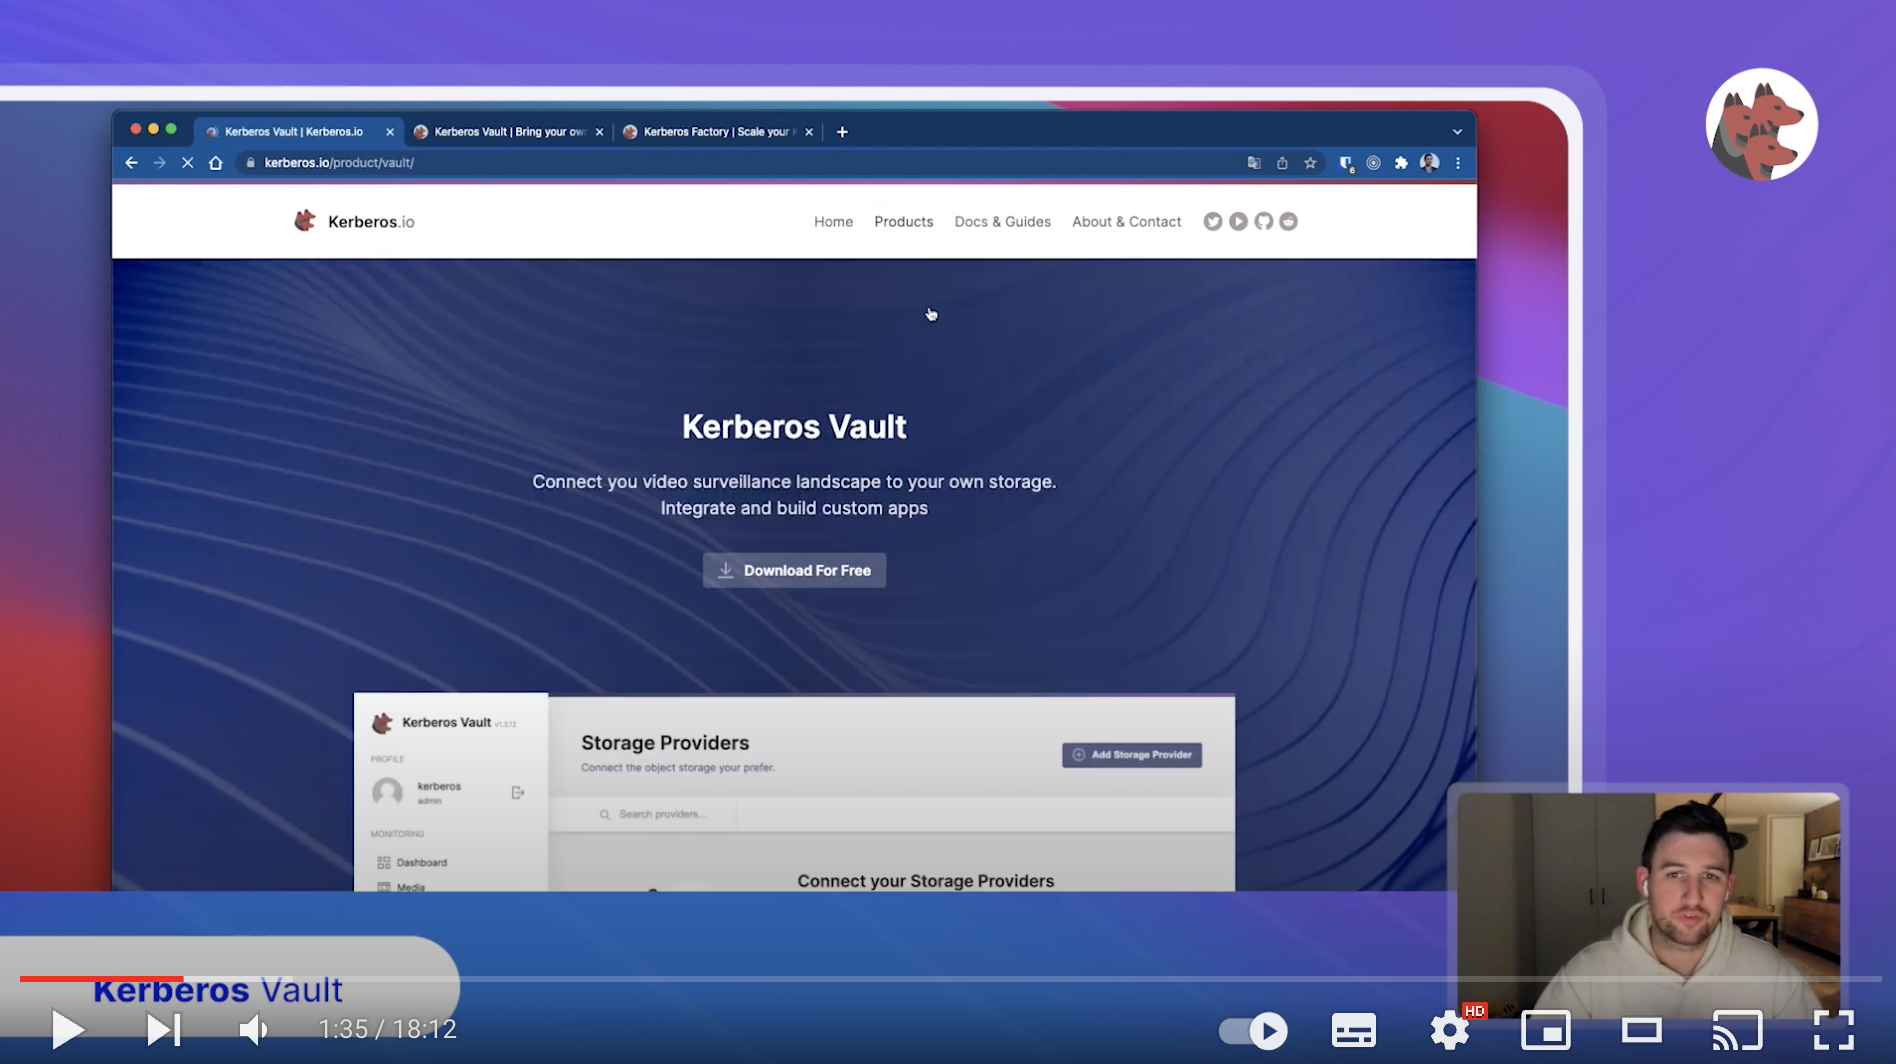 Bring Your Own Storage and extend/integrate your video landscape with Kerberos Vault